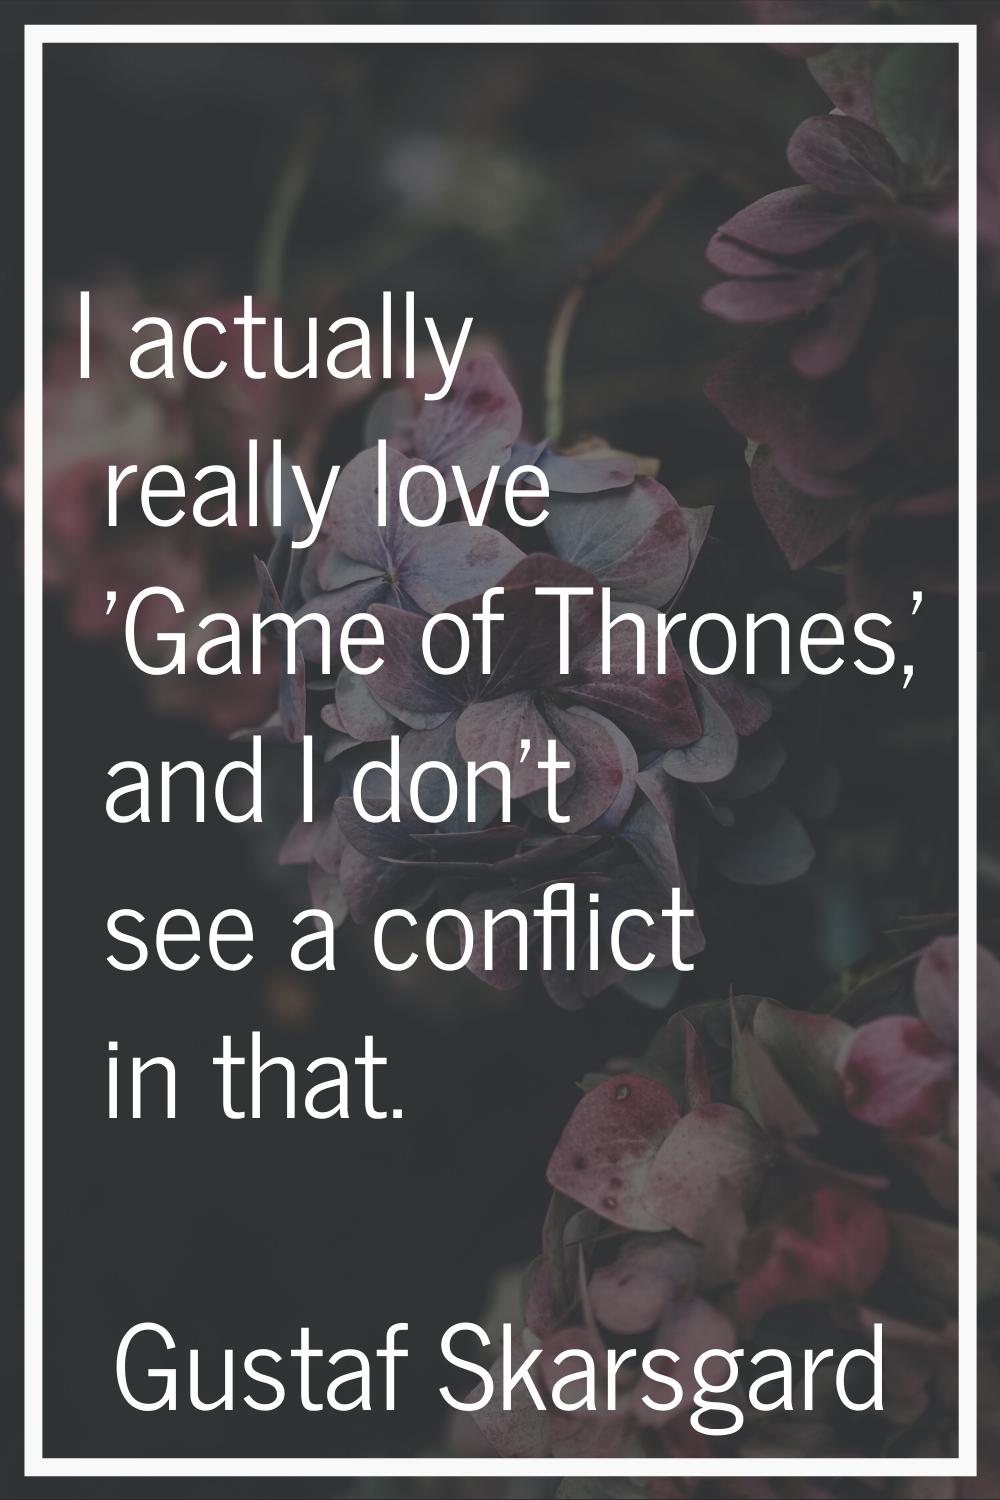 I actually really love 'Game of Thrones,' and I don't see a conflict in that.